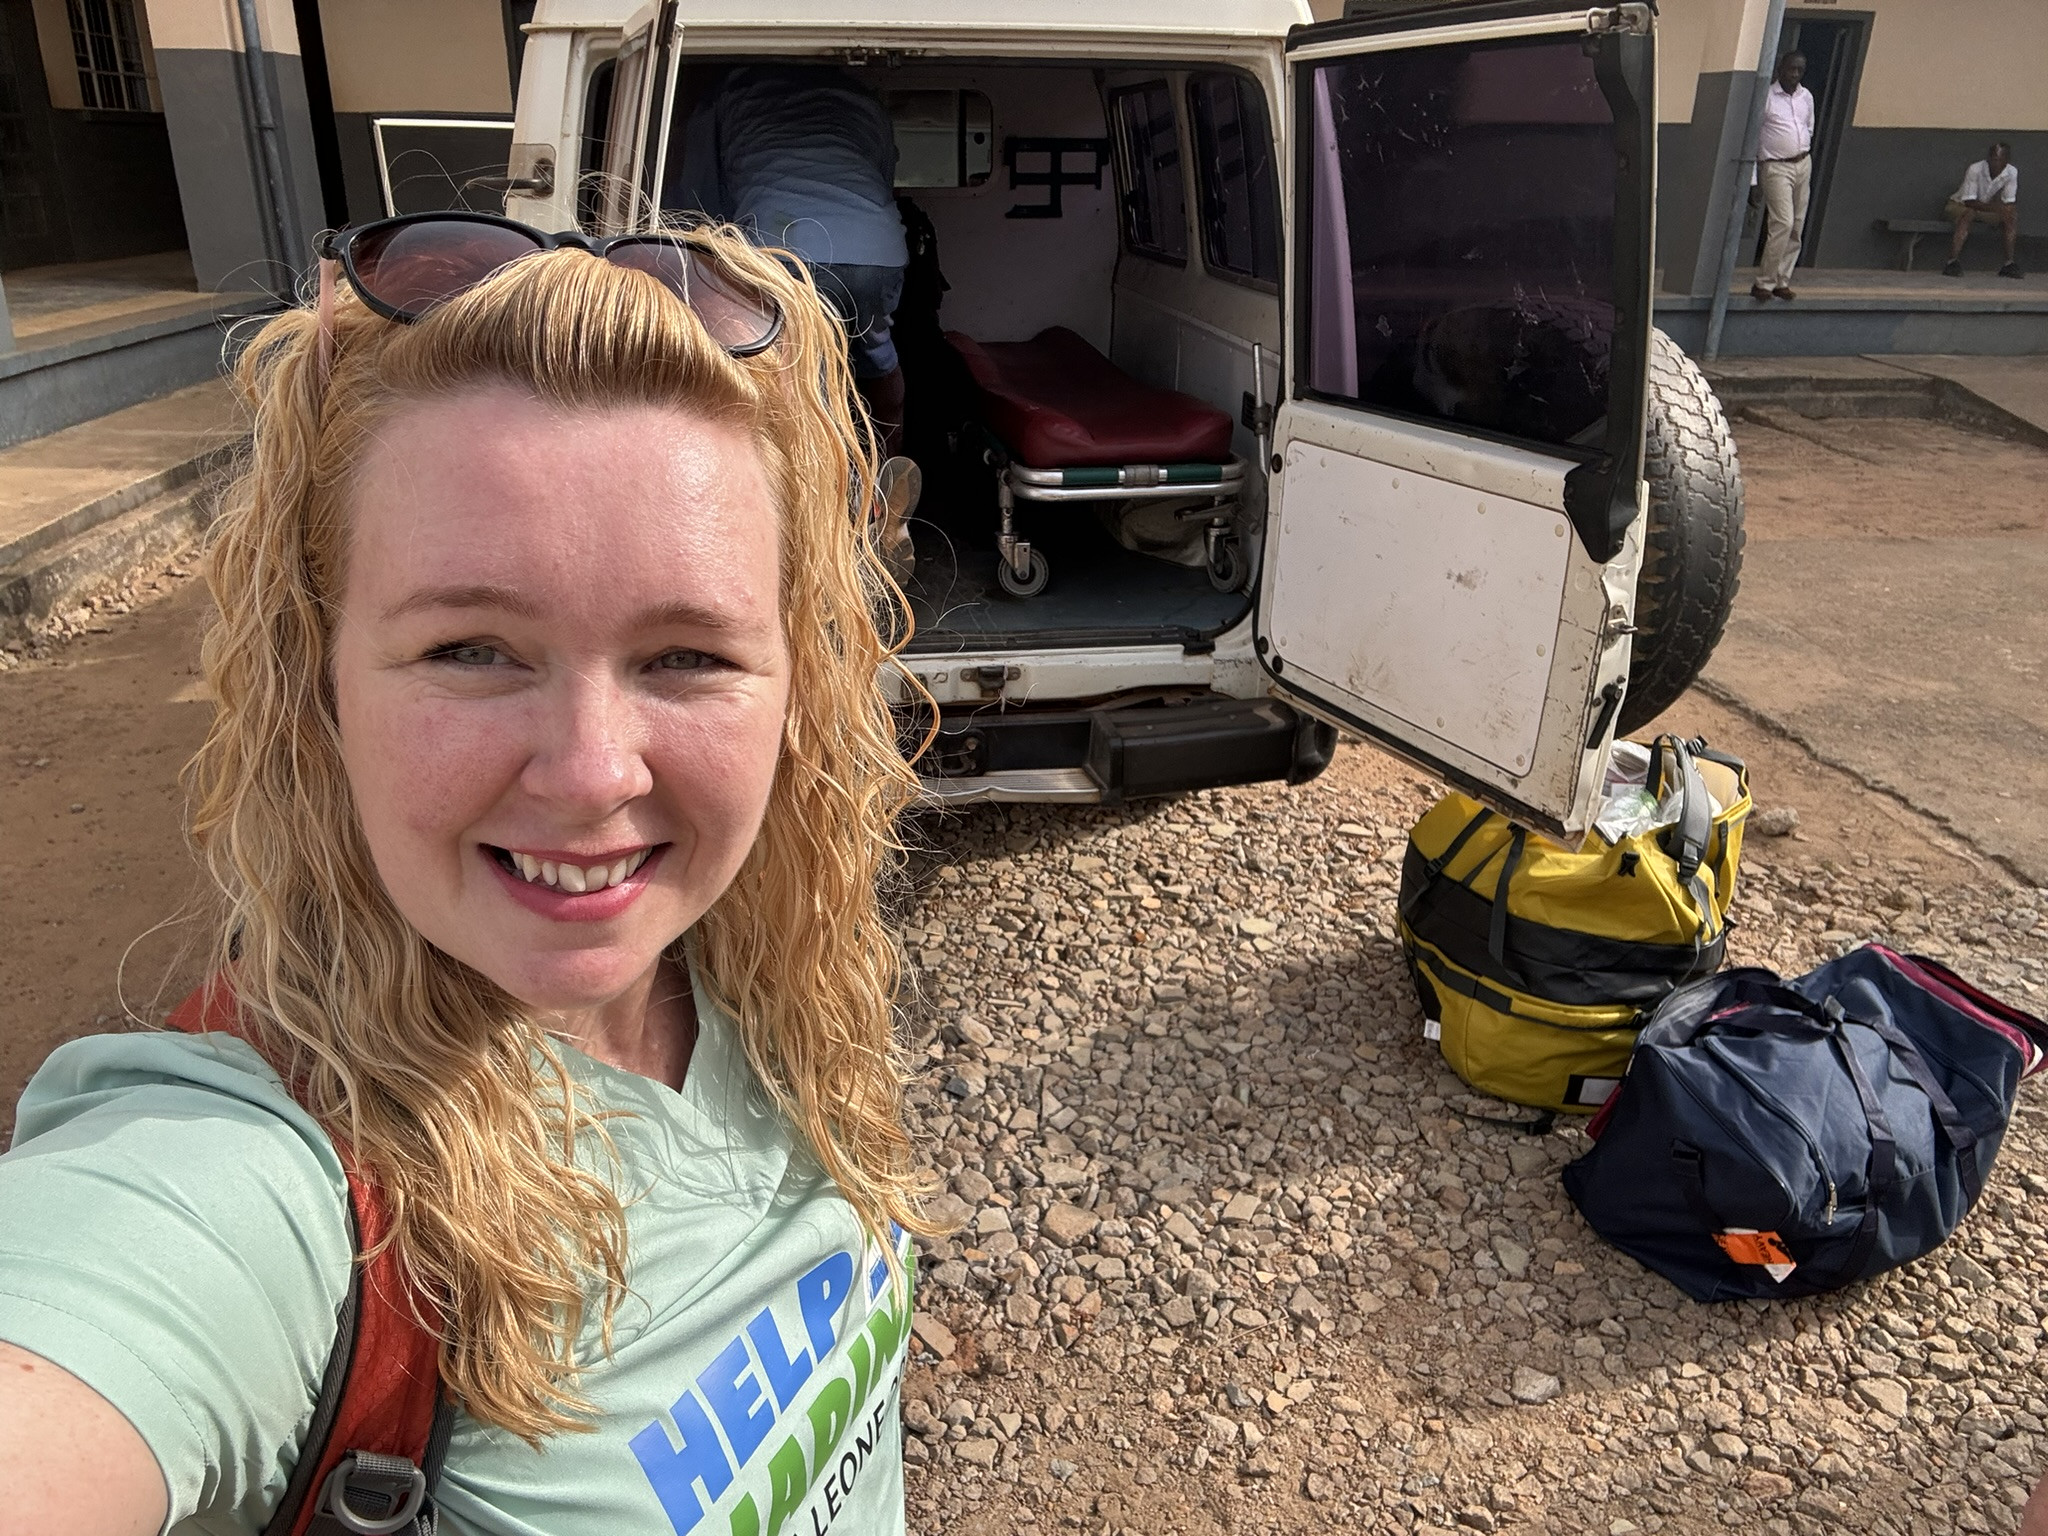 Amanda in Sierra Leone - pictured with a vehicle with a medical trolley inside behind her